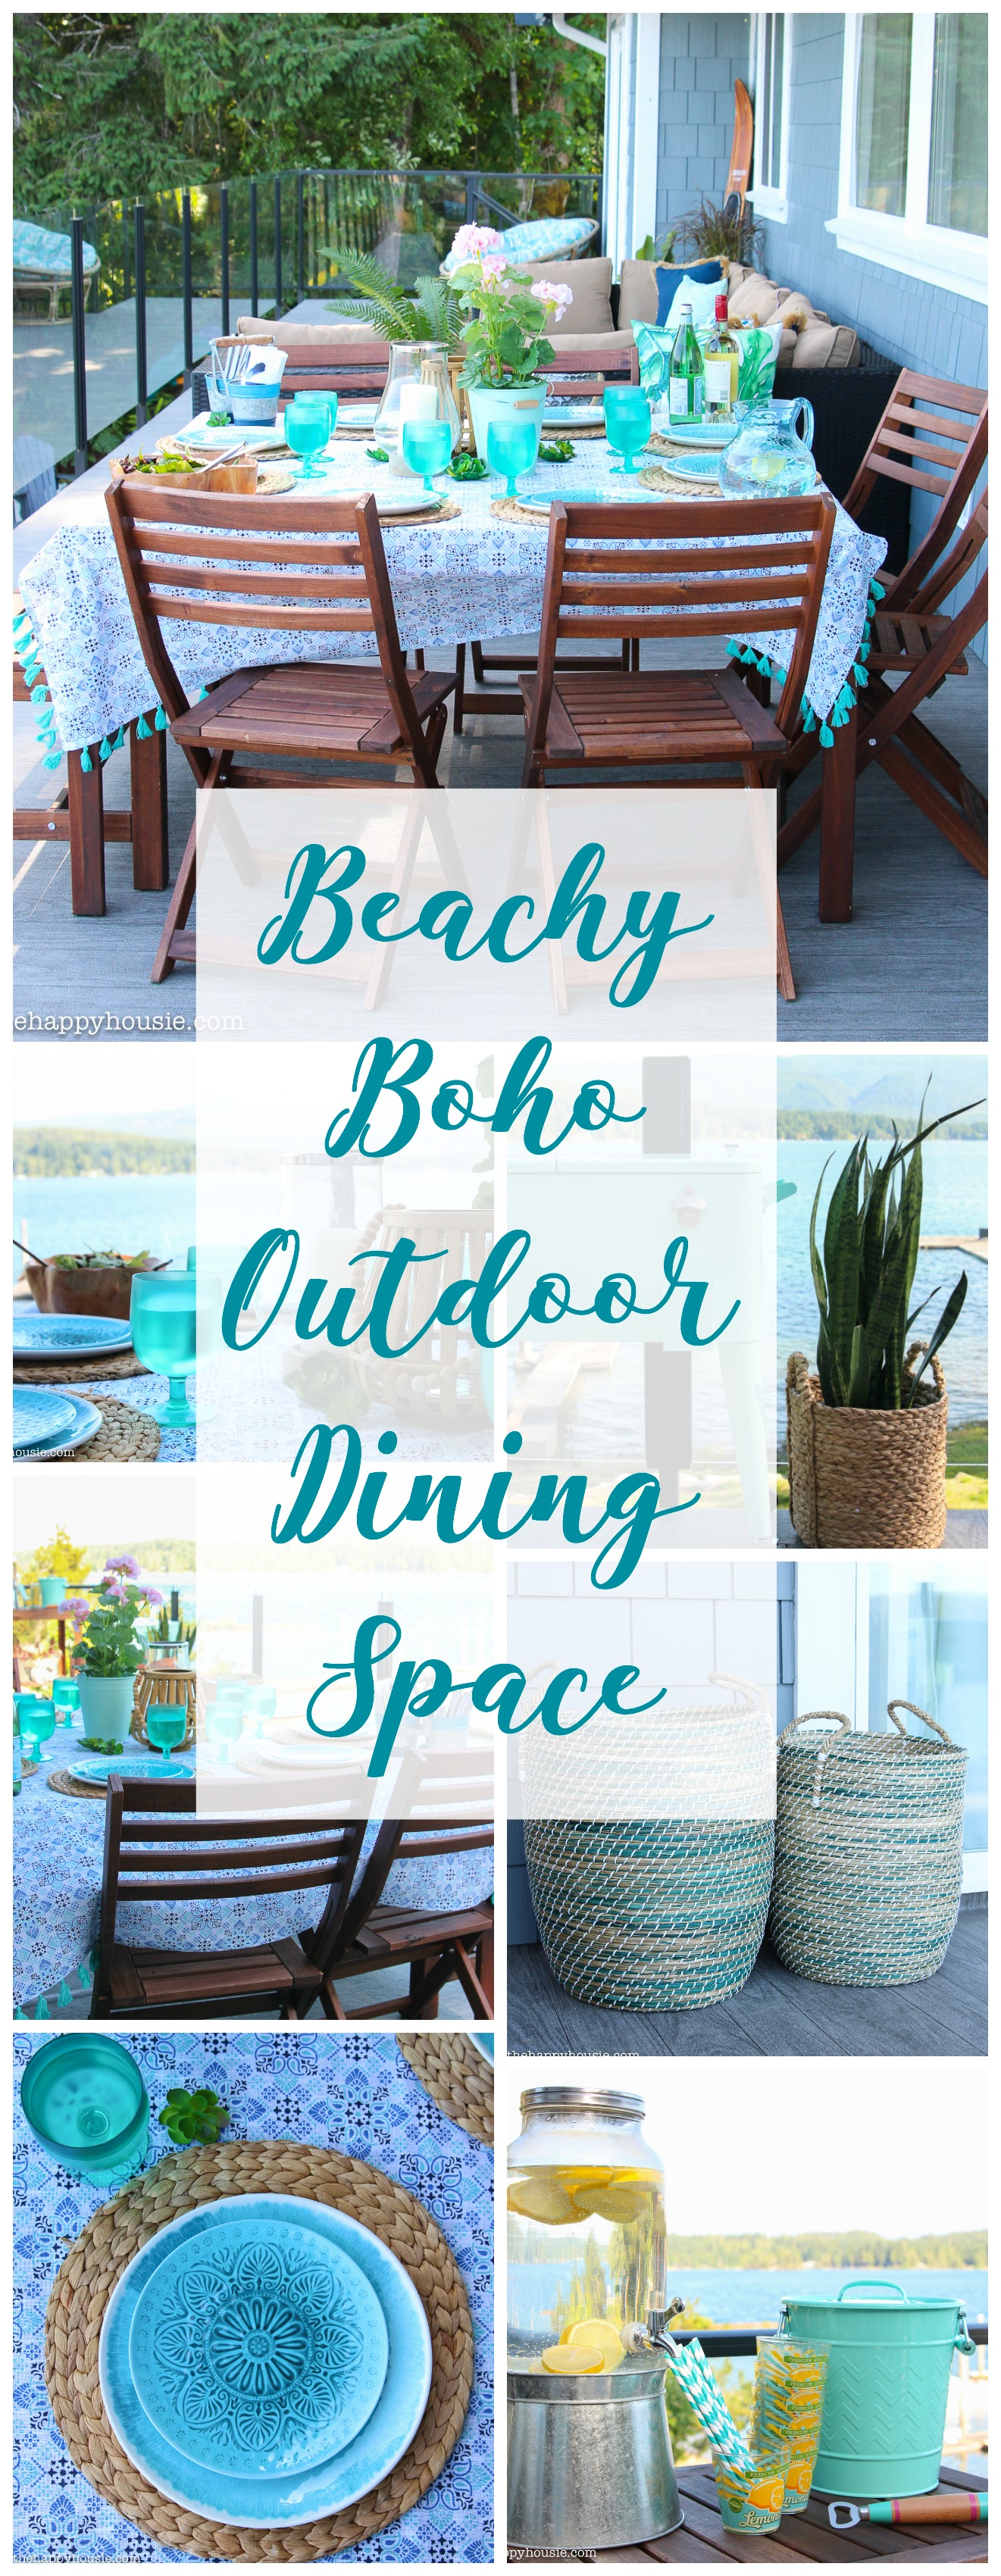 The outdoor patio decorated in a beachy boho outdoor theme.